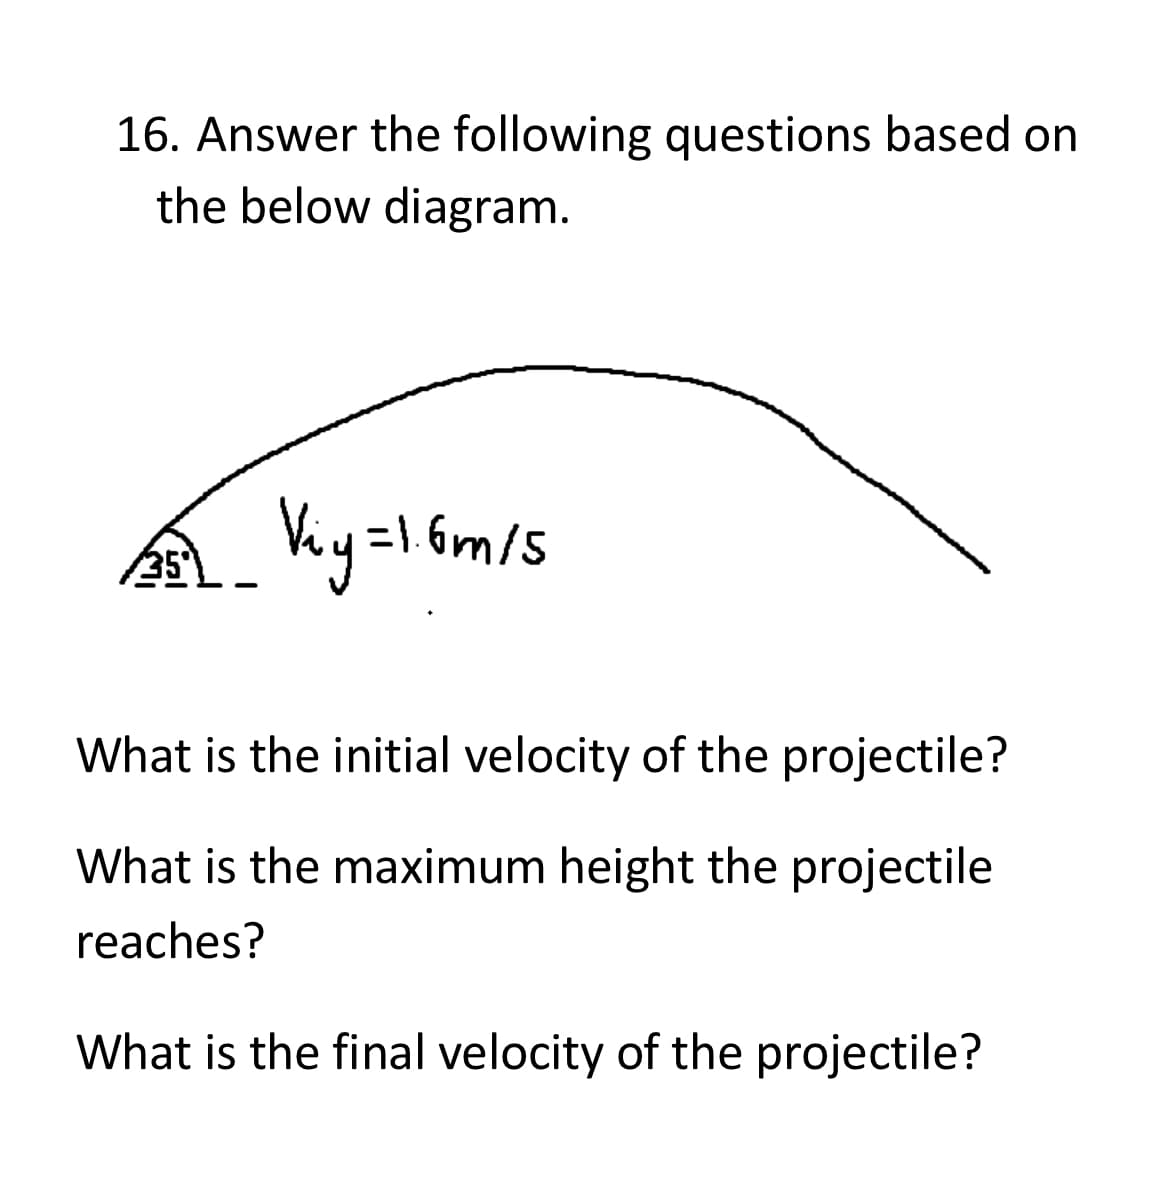 16. Answer the following questions based on
the below diagram.
251_ Viy=1.6m/5
What is the initial velocity of the projectile?
What is the maximum height the projectile
reaches?
What is the final velocity of the projectile?